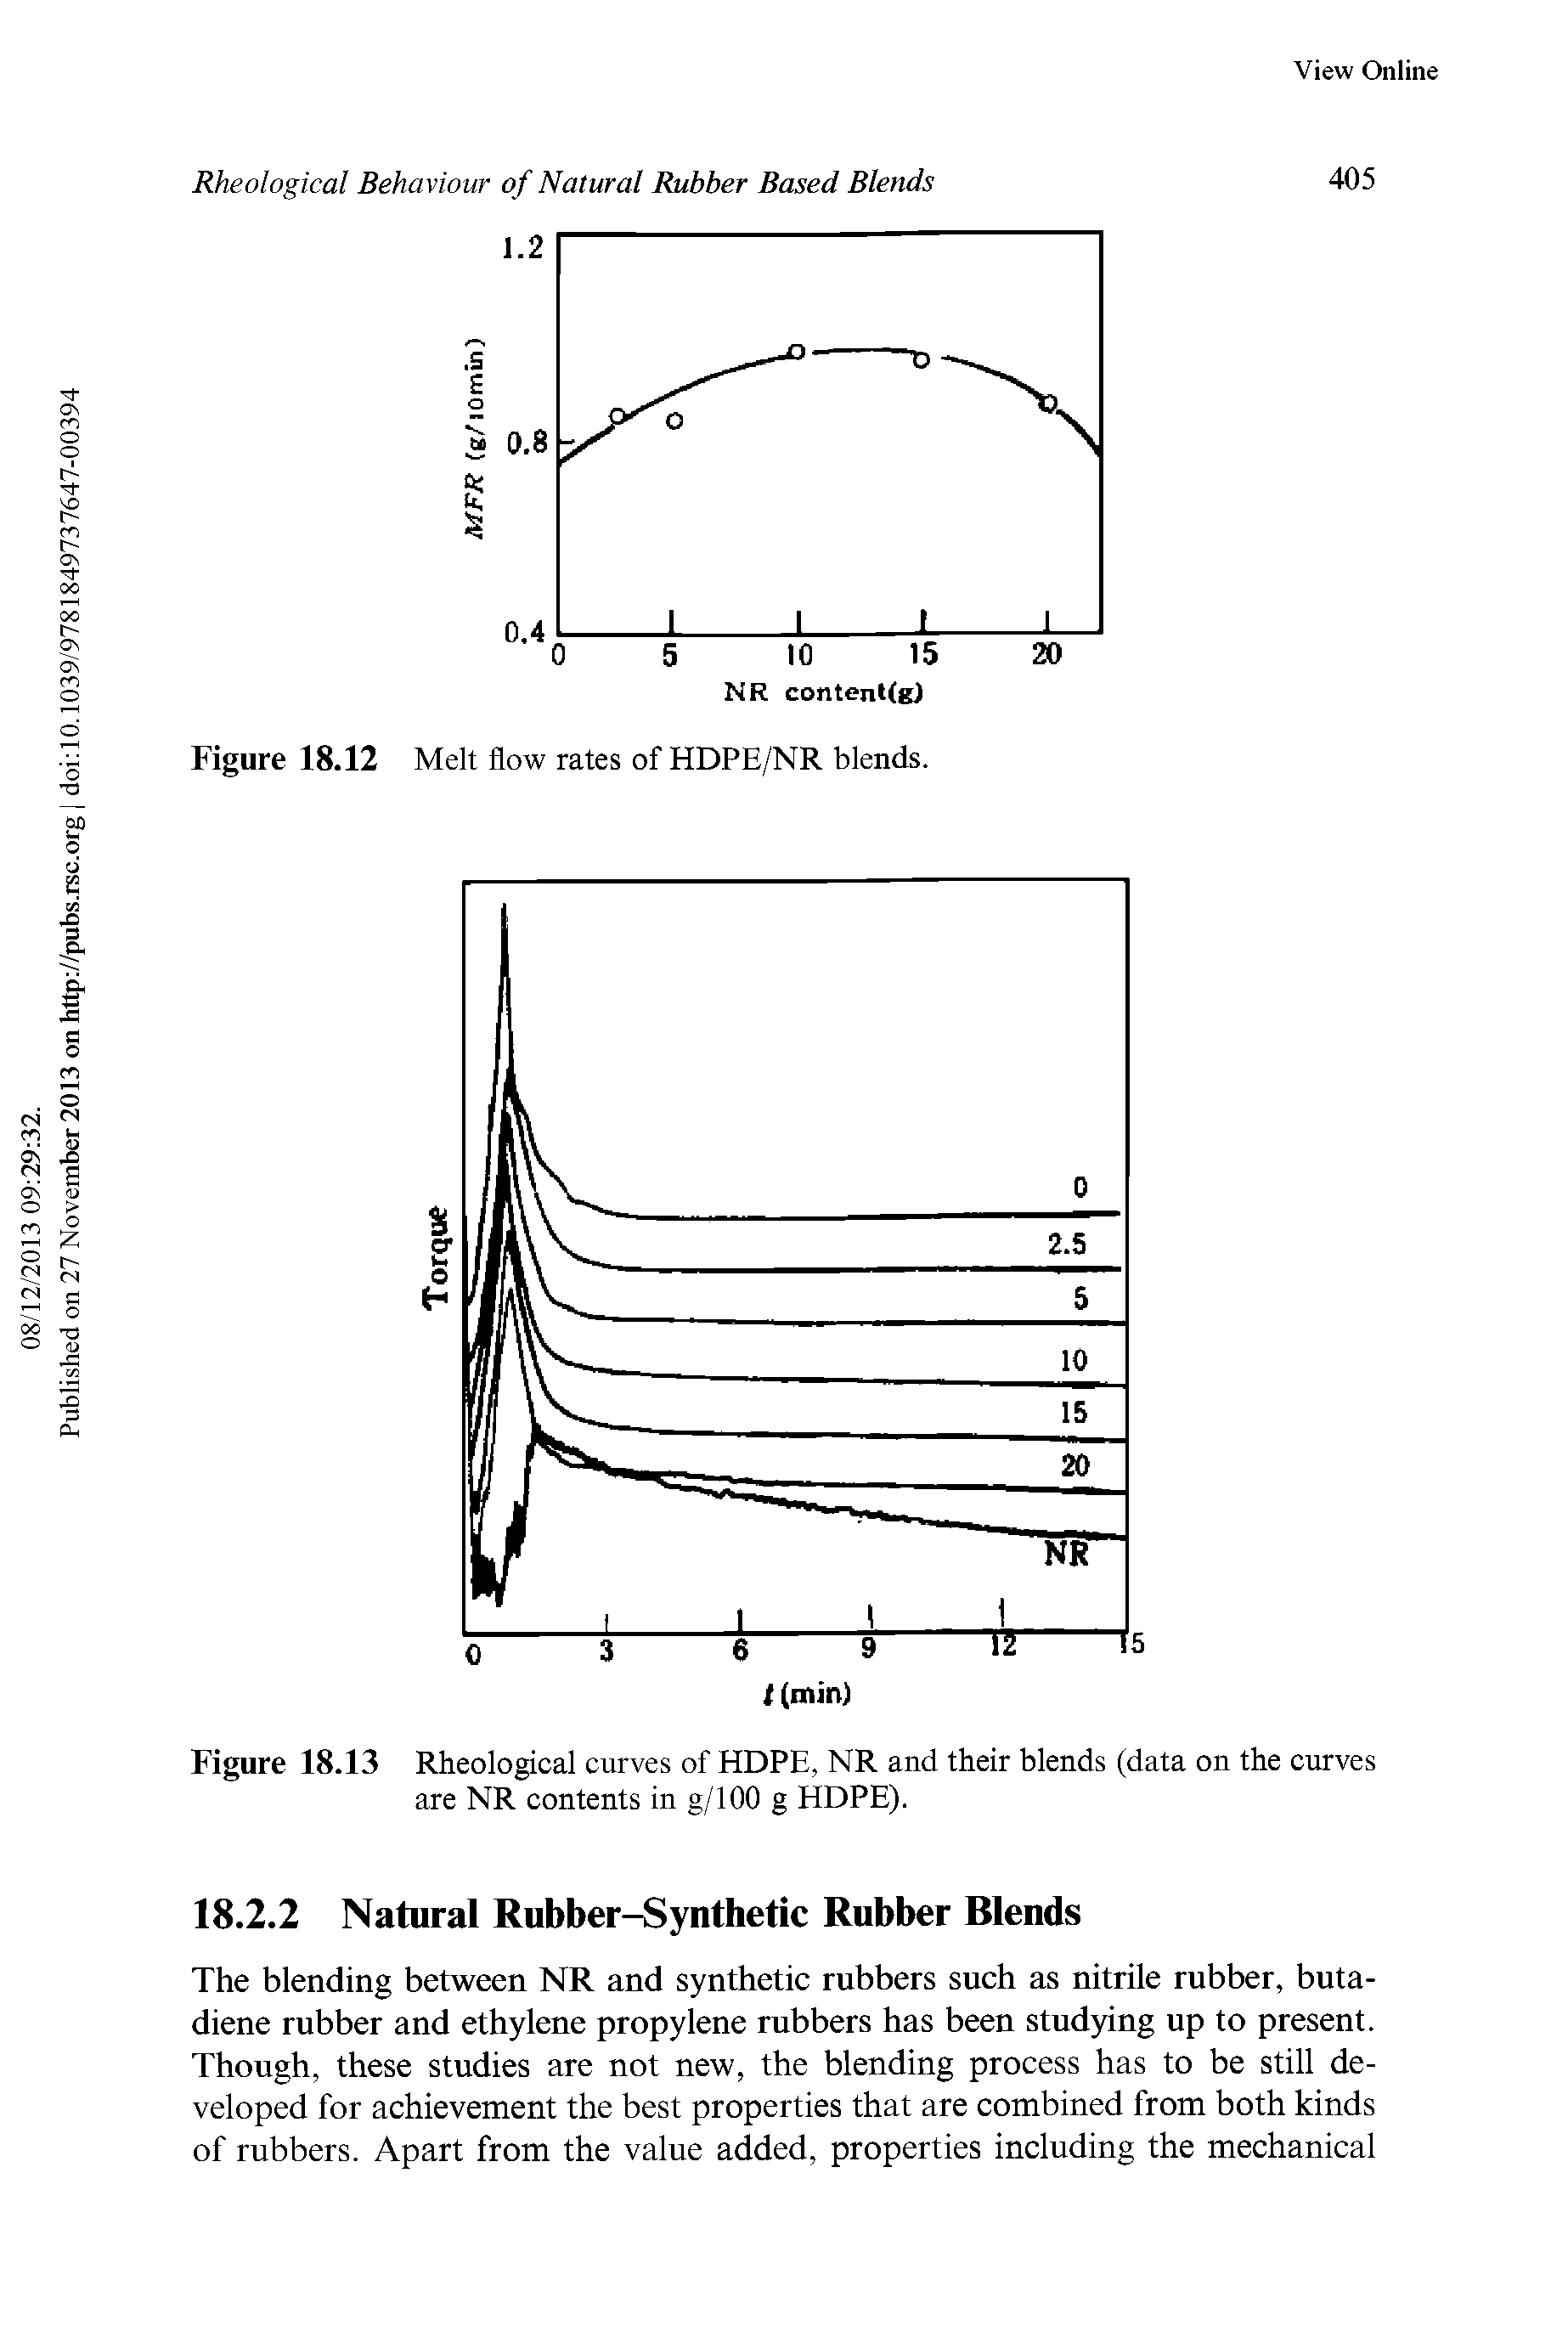 Figure 18.13 Rheological curves of HDPE, NR and their blends (data on the curves are NR contents in g/100 g HDPE).